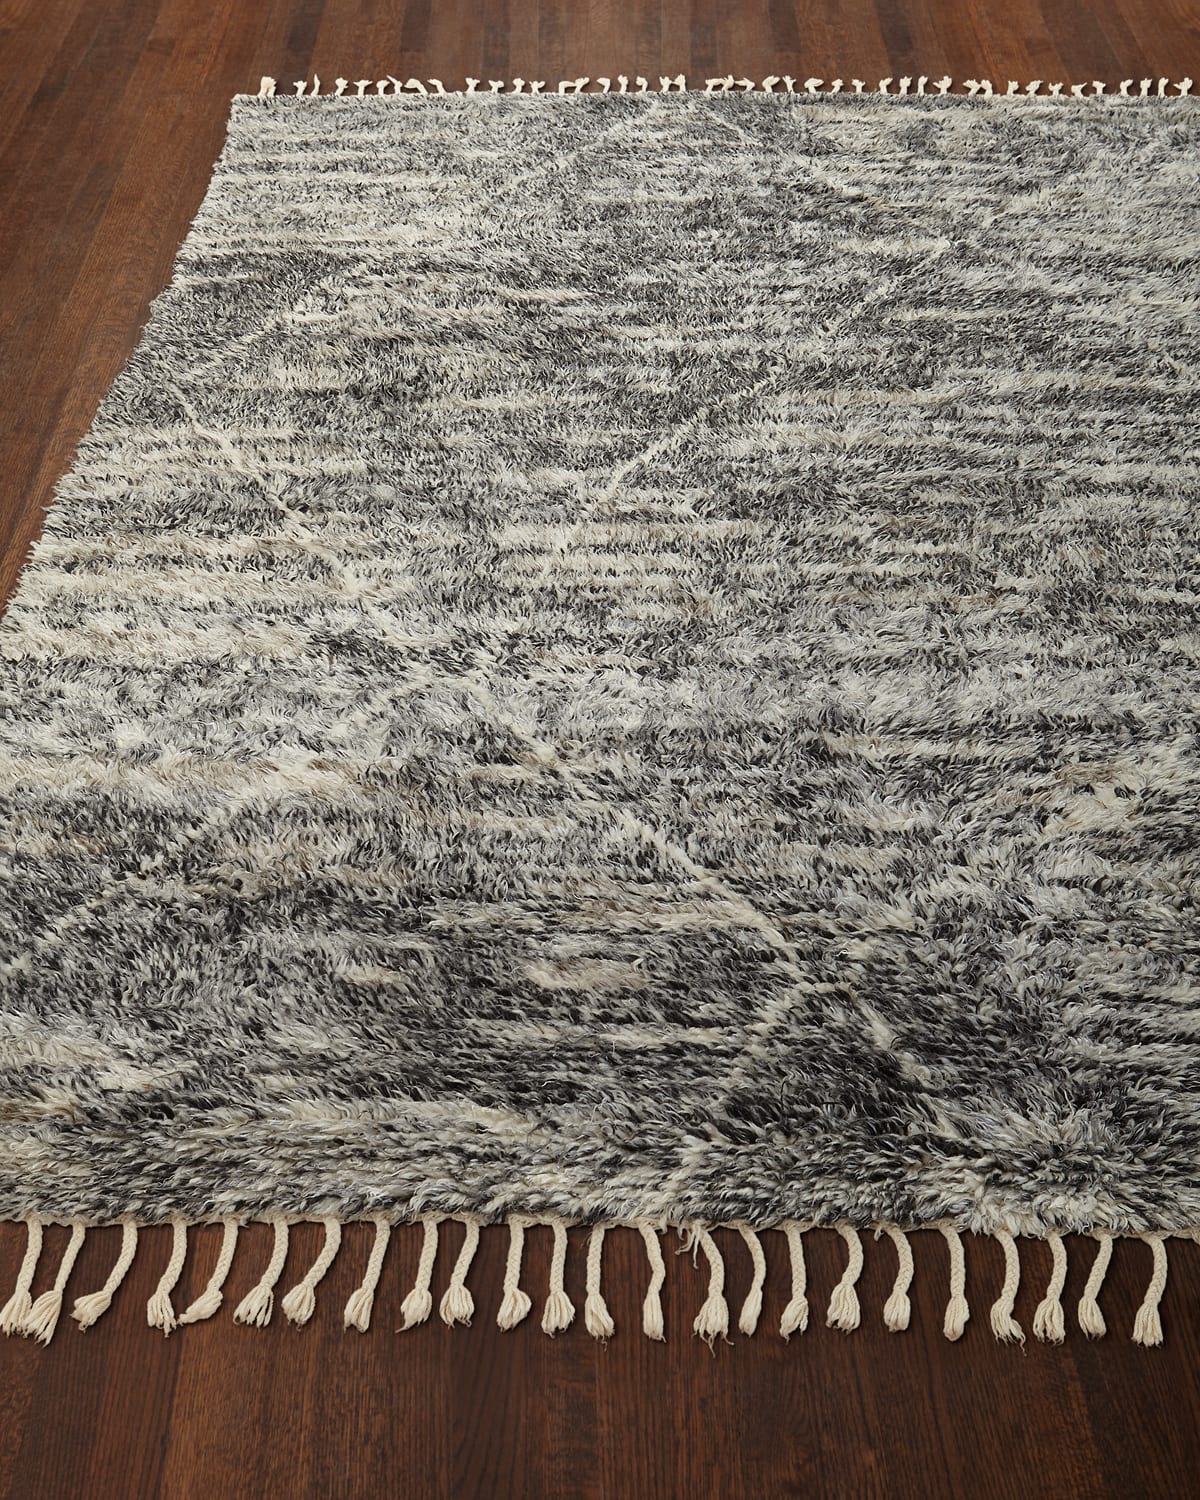 Reanna Hand-Knotted Shag Rug, 8' x 10' at RugsBySize.com